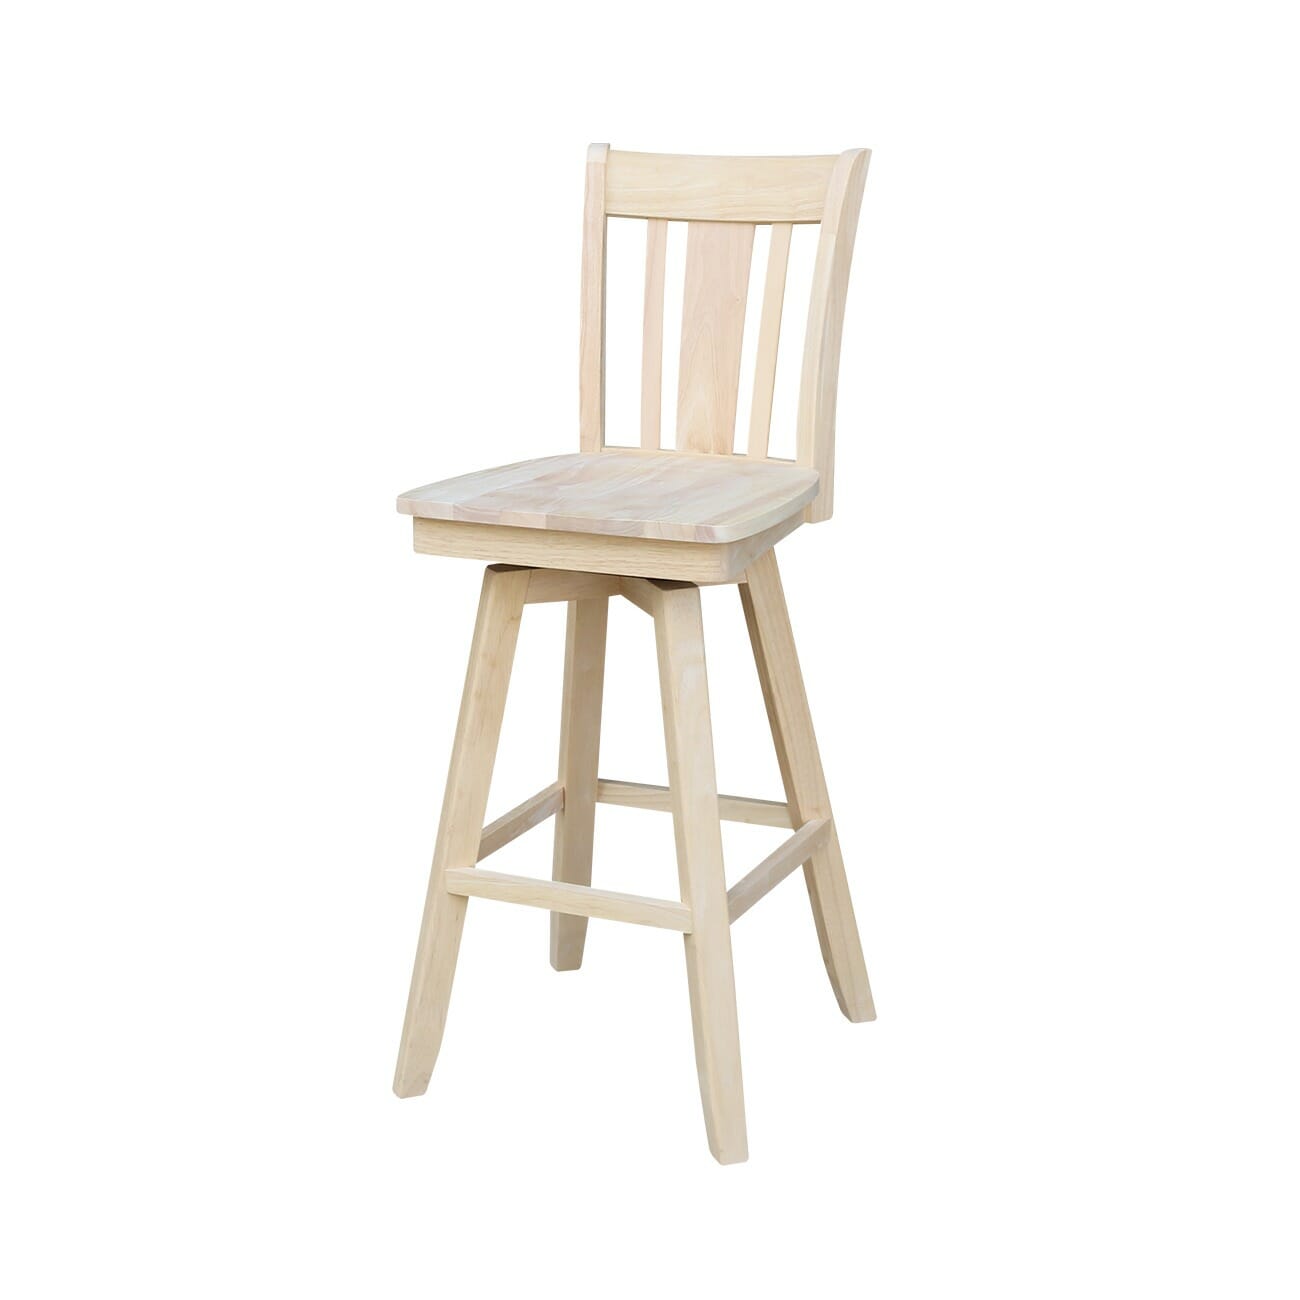 S 103sw 30 Inch Tall San Remo Swivel, Unfinished Solid Wood Bar Stools